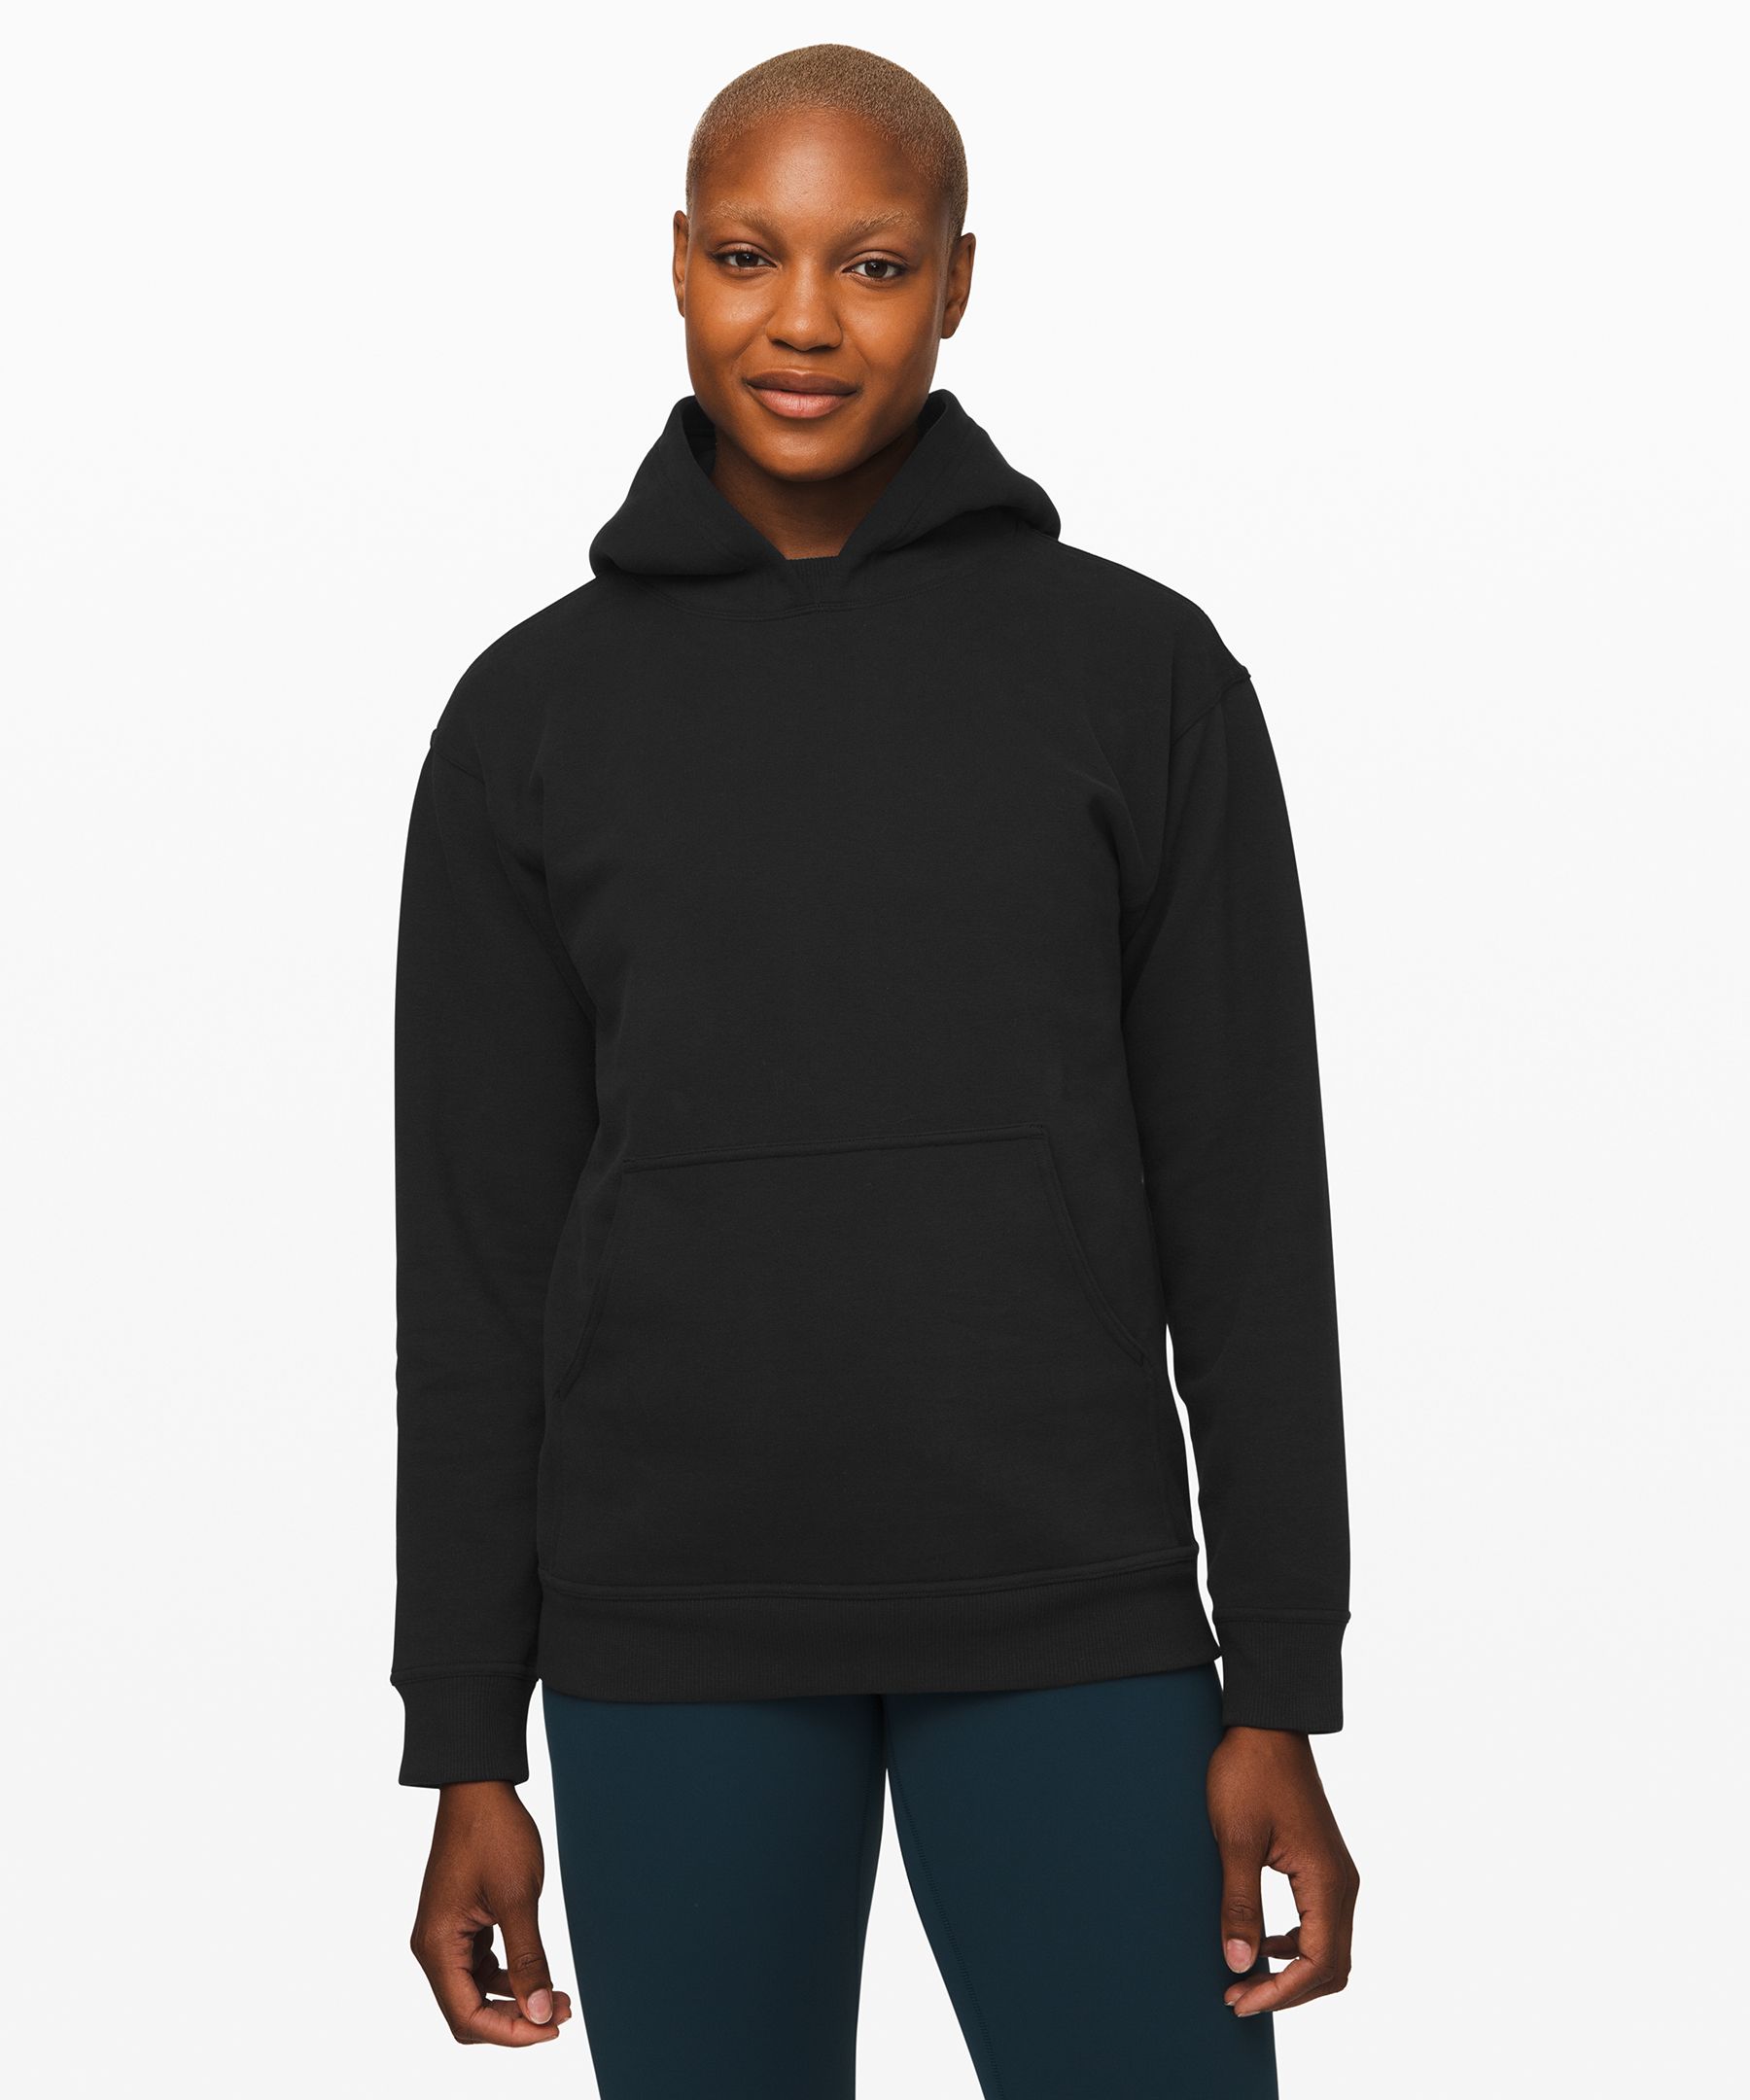 lululemon all yours hoodie review